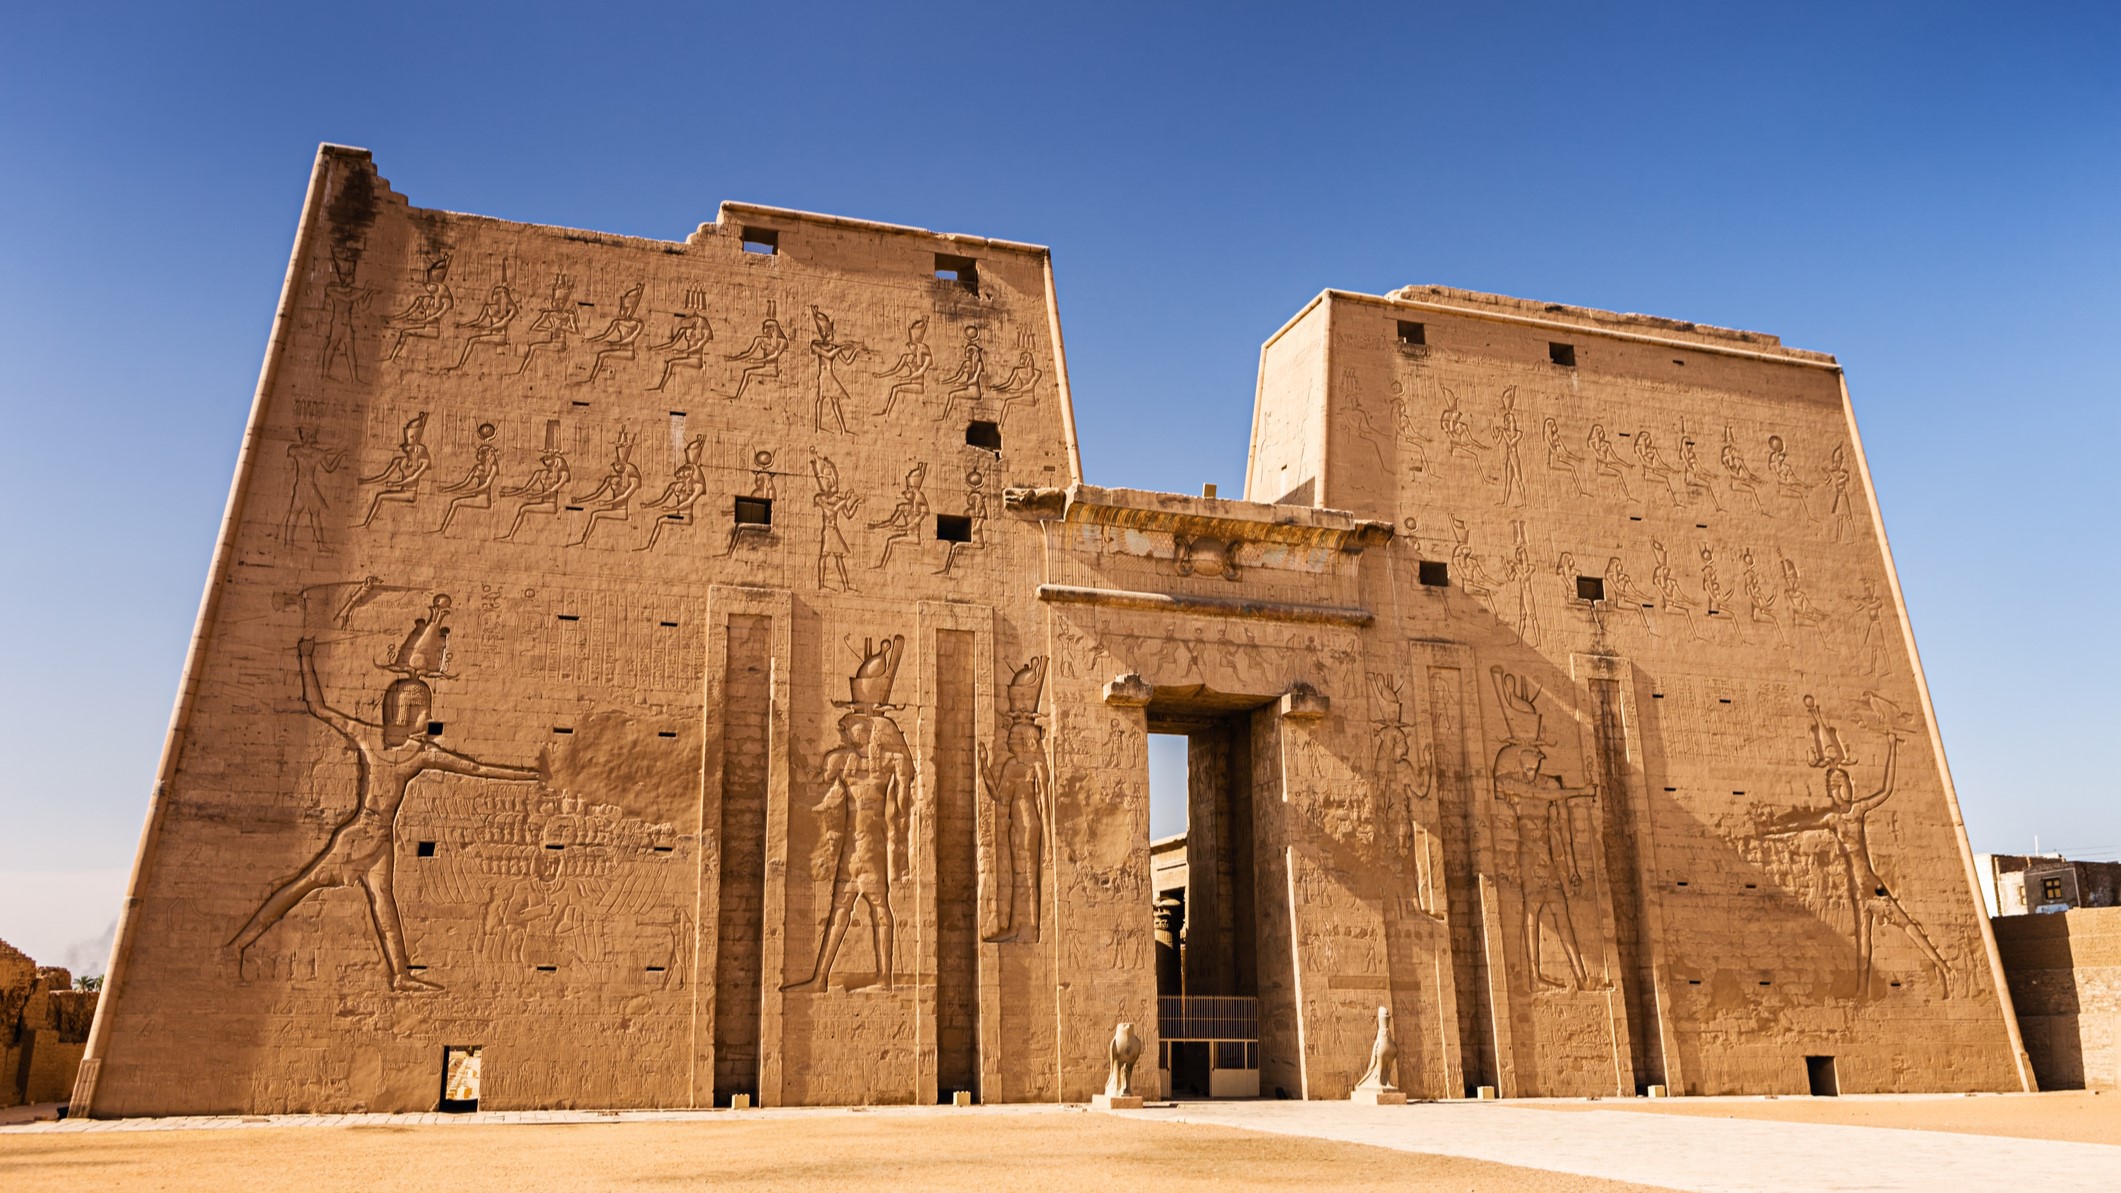 Edfu Temple of Horus is a large Ancient Egyptian temple complex located on West Bank of Nile River, between Esna and Aswan in Egypt. A large temple stands tall with large inscriptions on the walls.